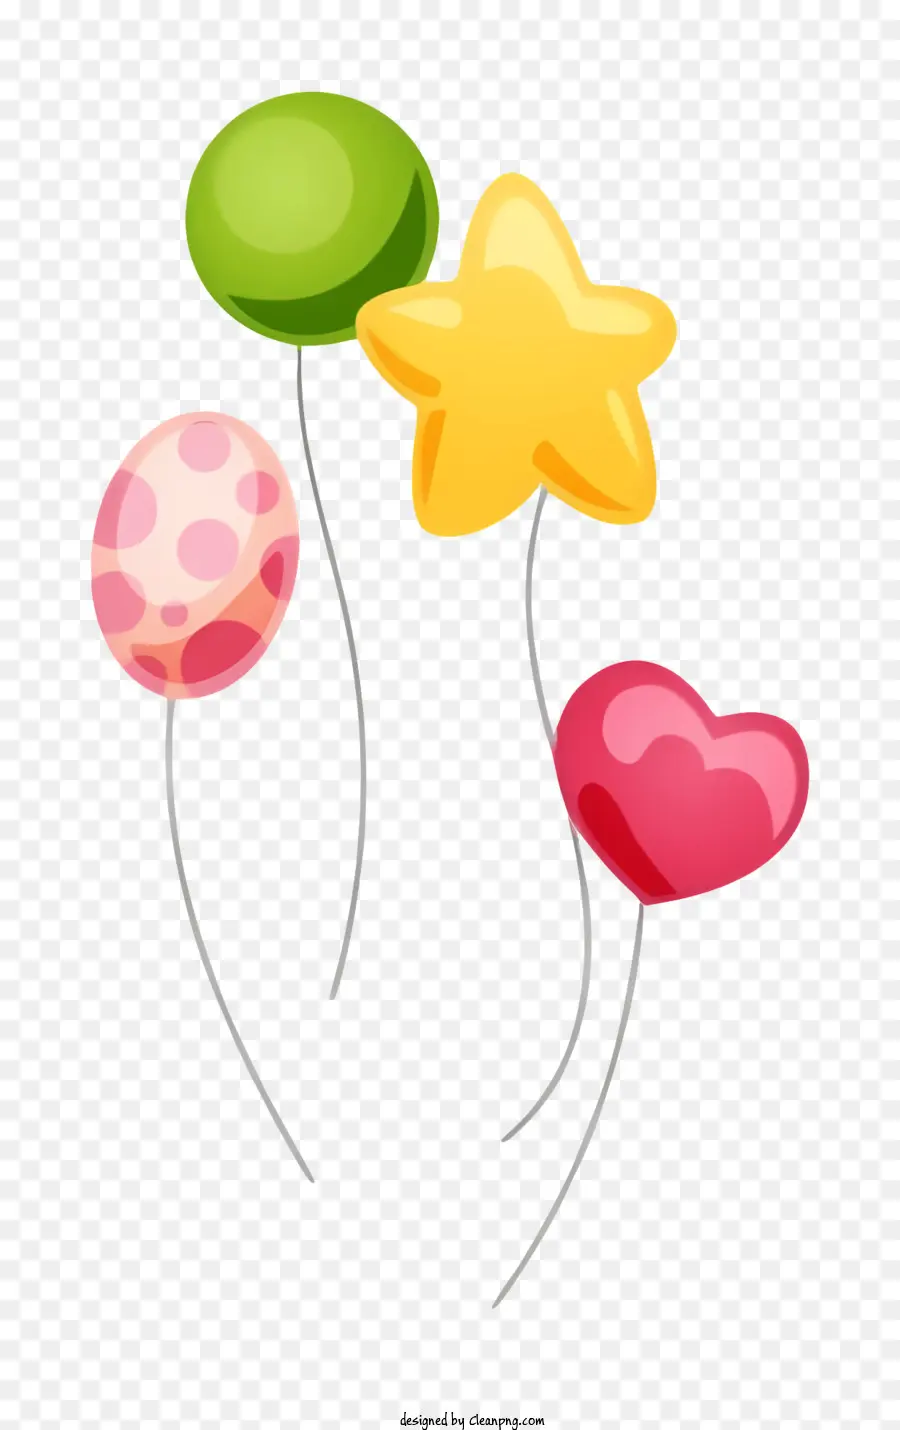 balloons colorful shapes colors star